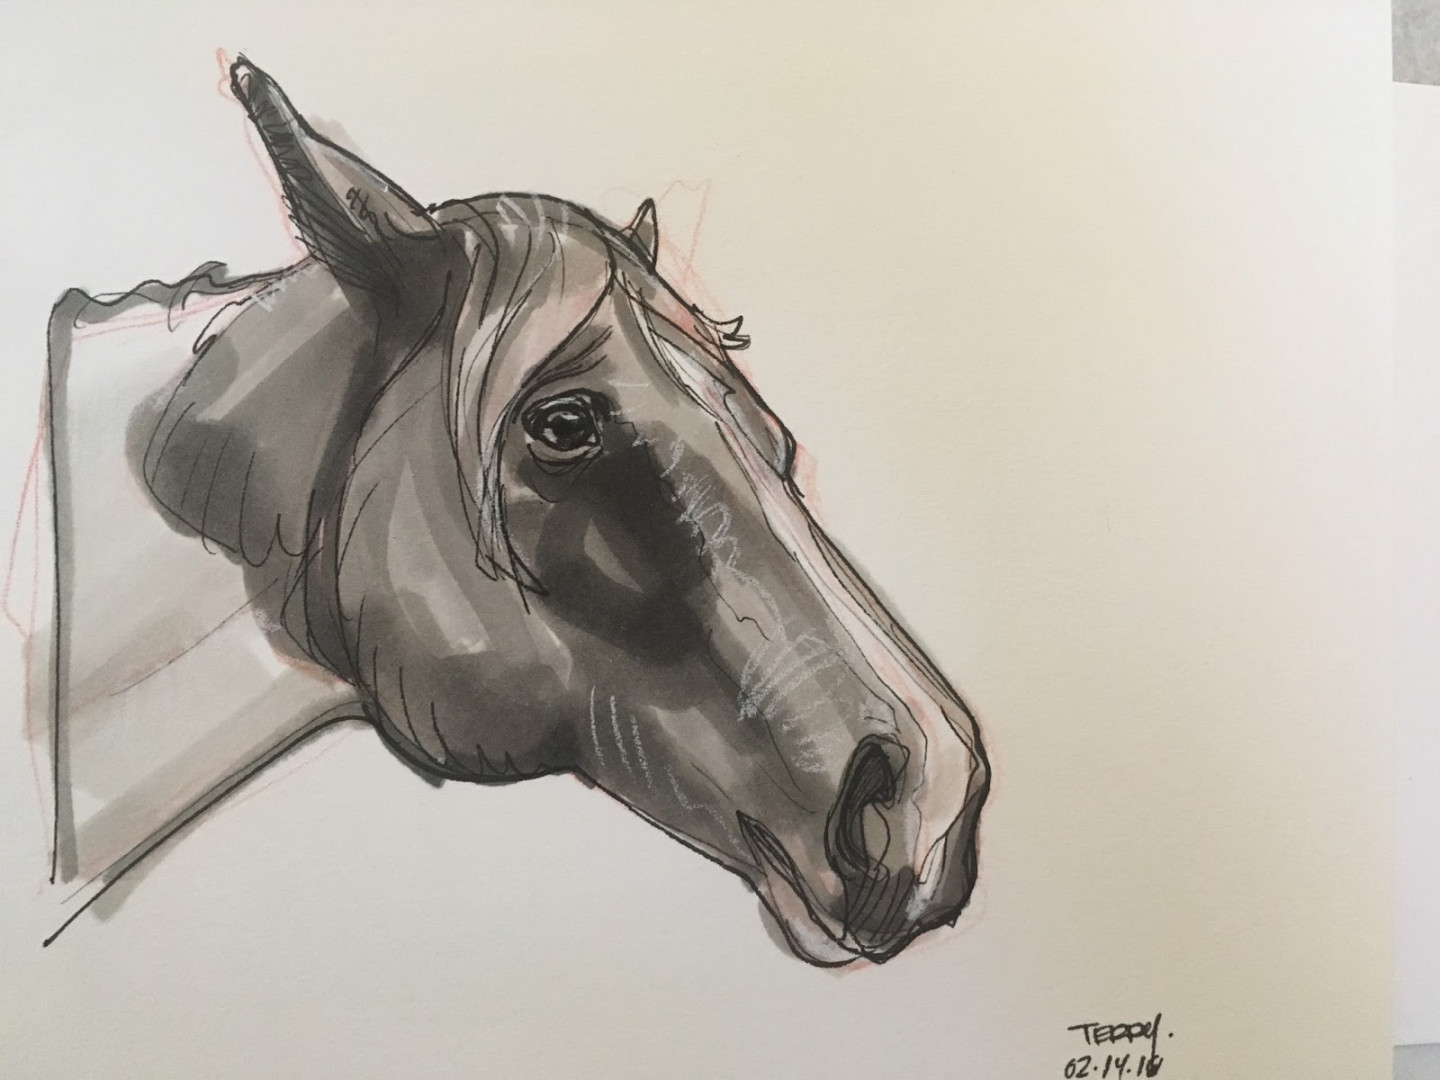 The Bombshellter: Copic Marker Demo of a Horse!